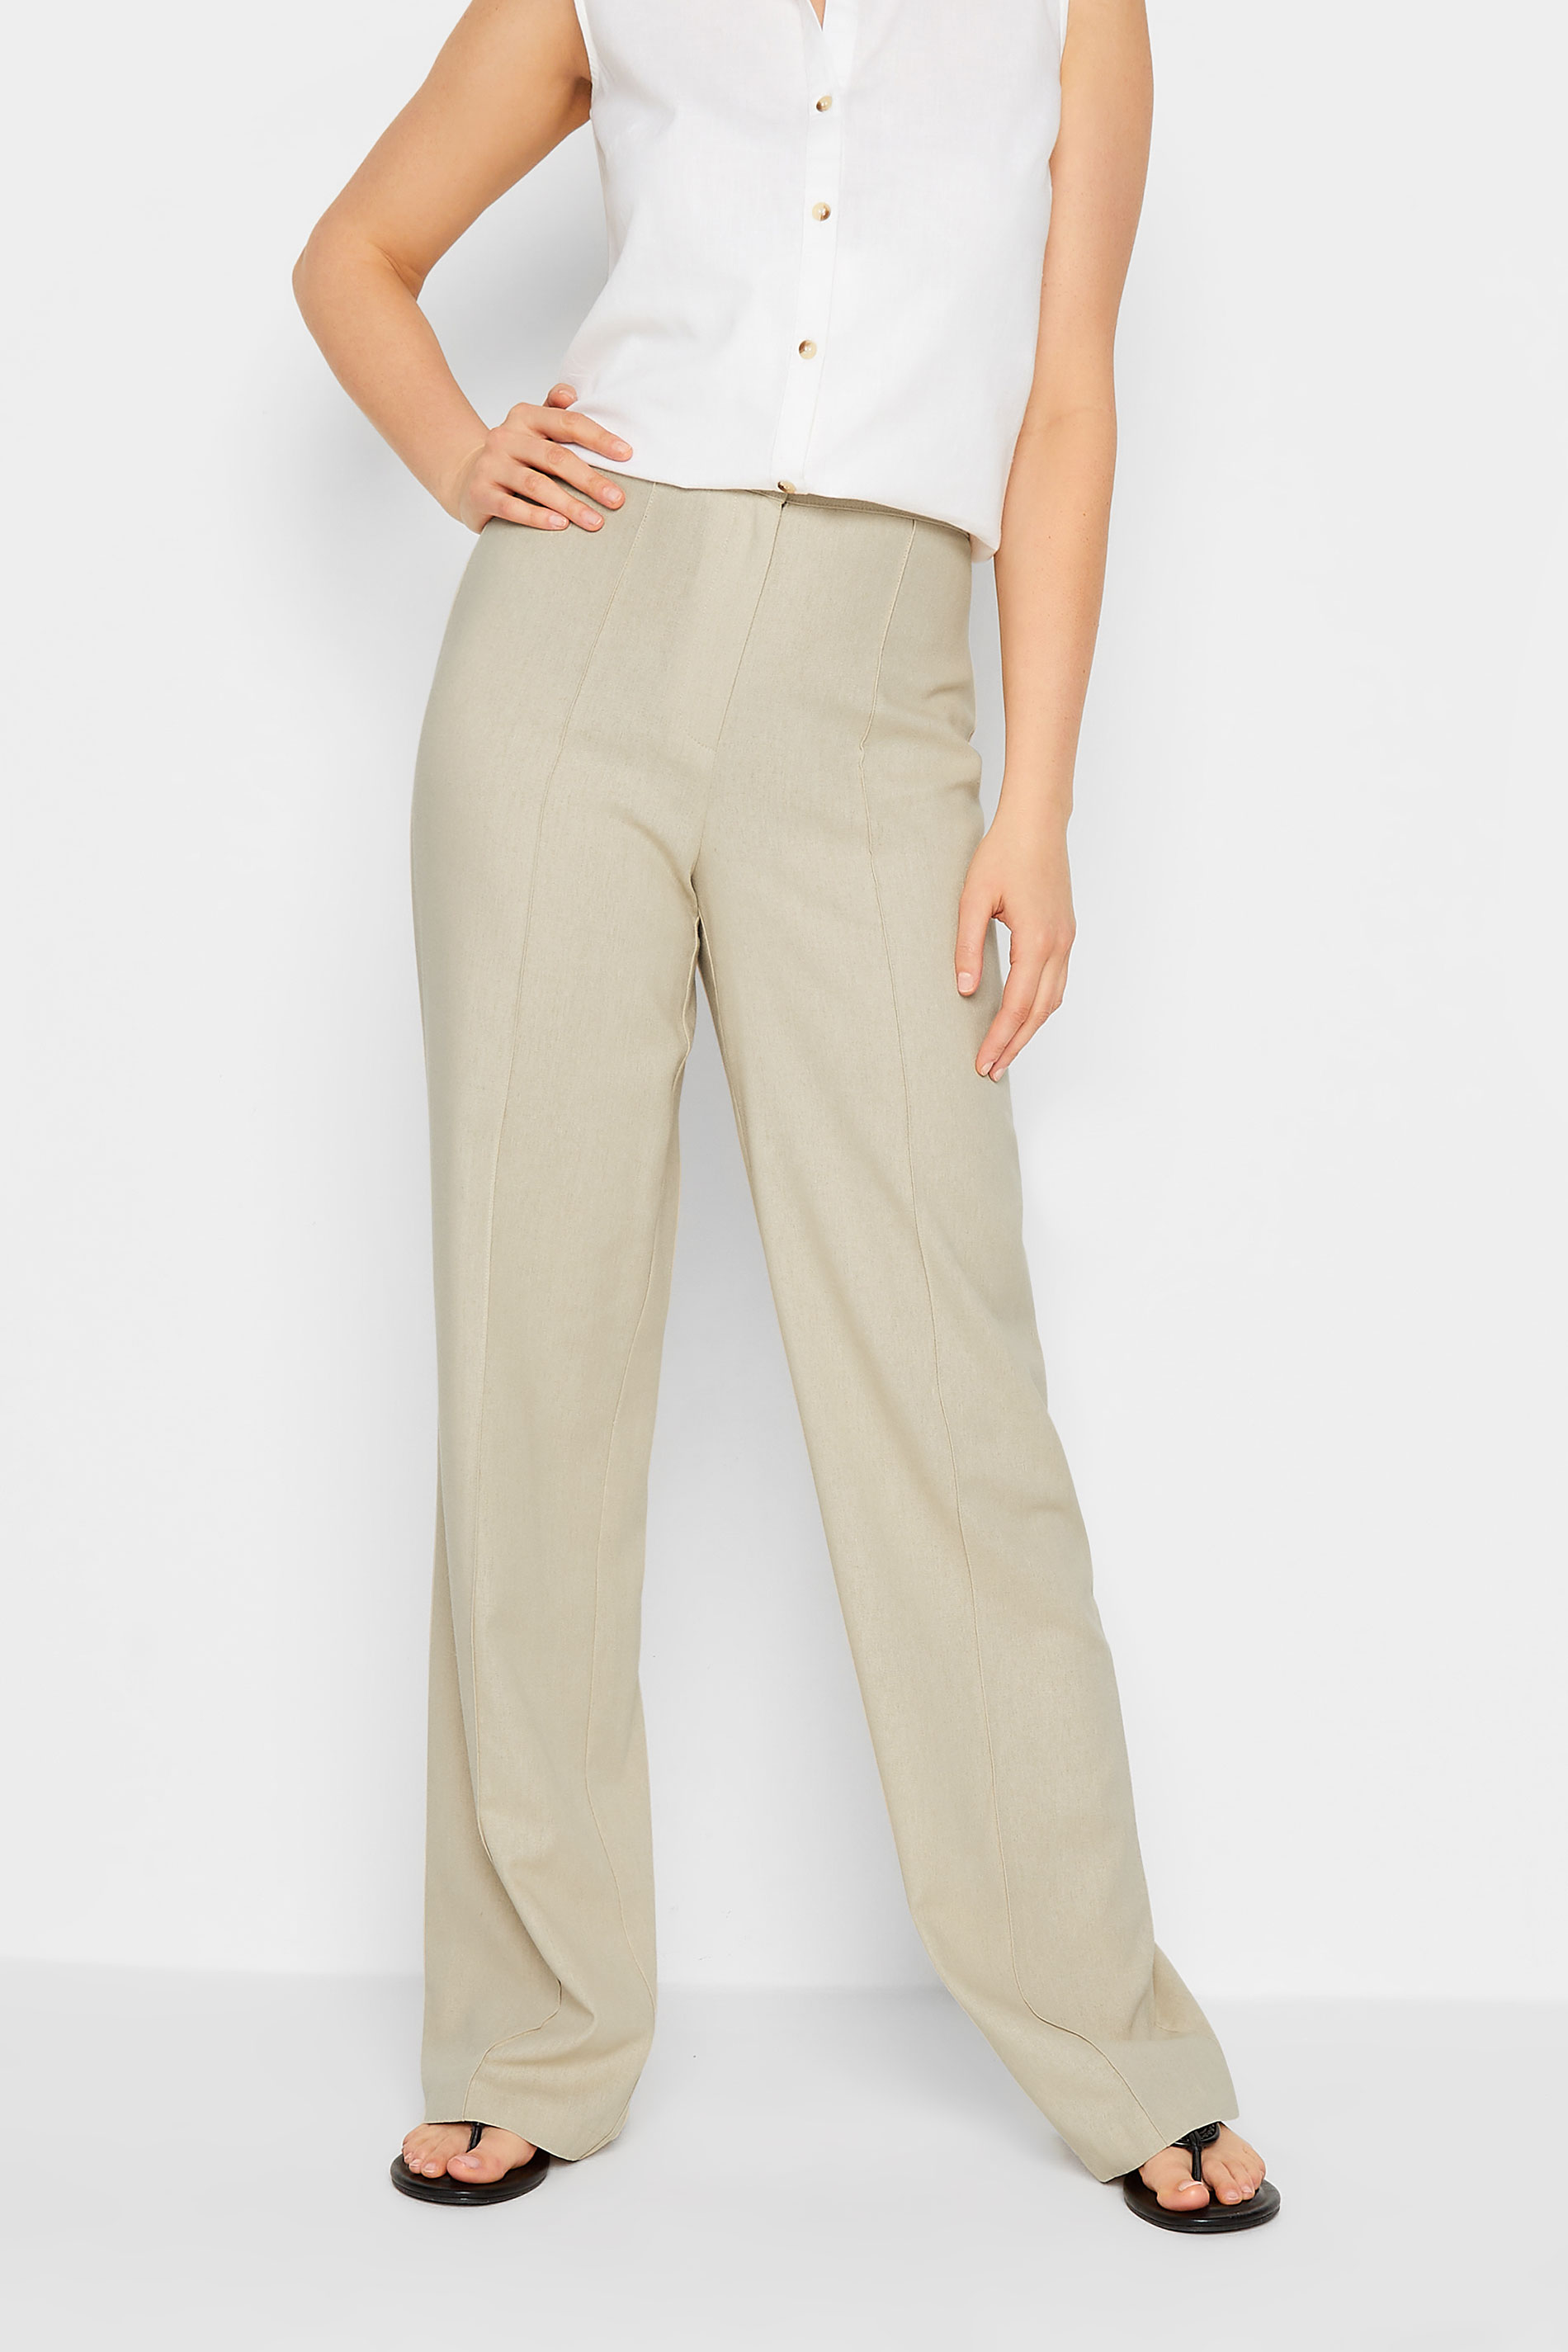 LTS Tall Stone Brown Linen Look Trousers | Long Tall Sally  1